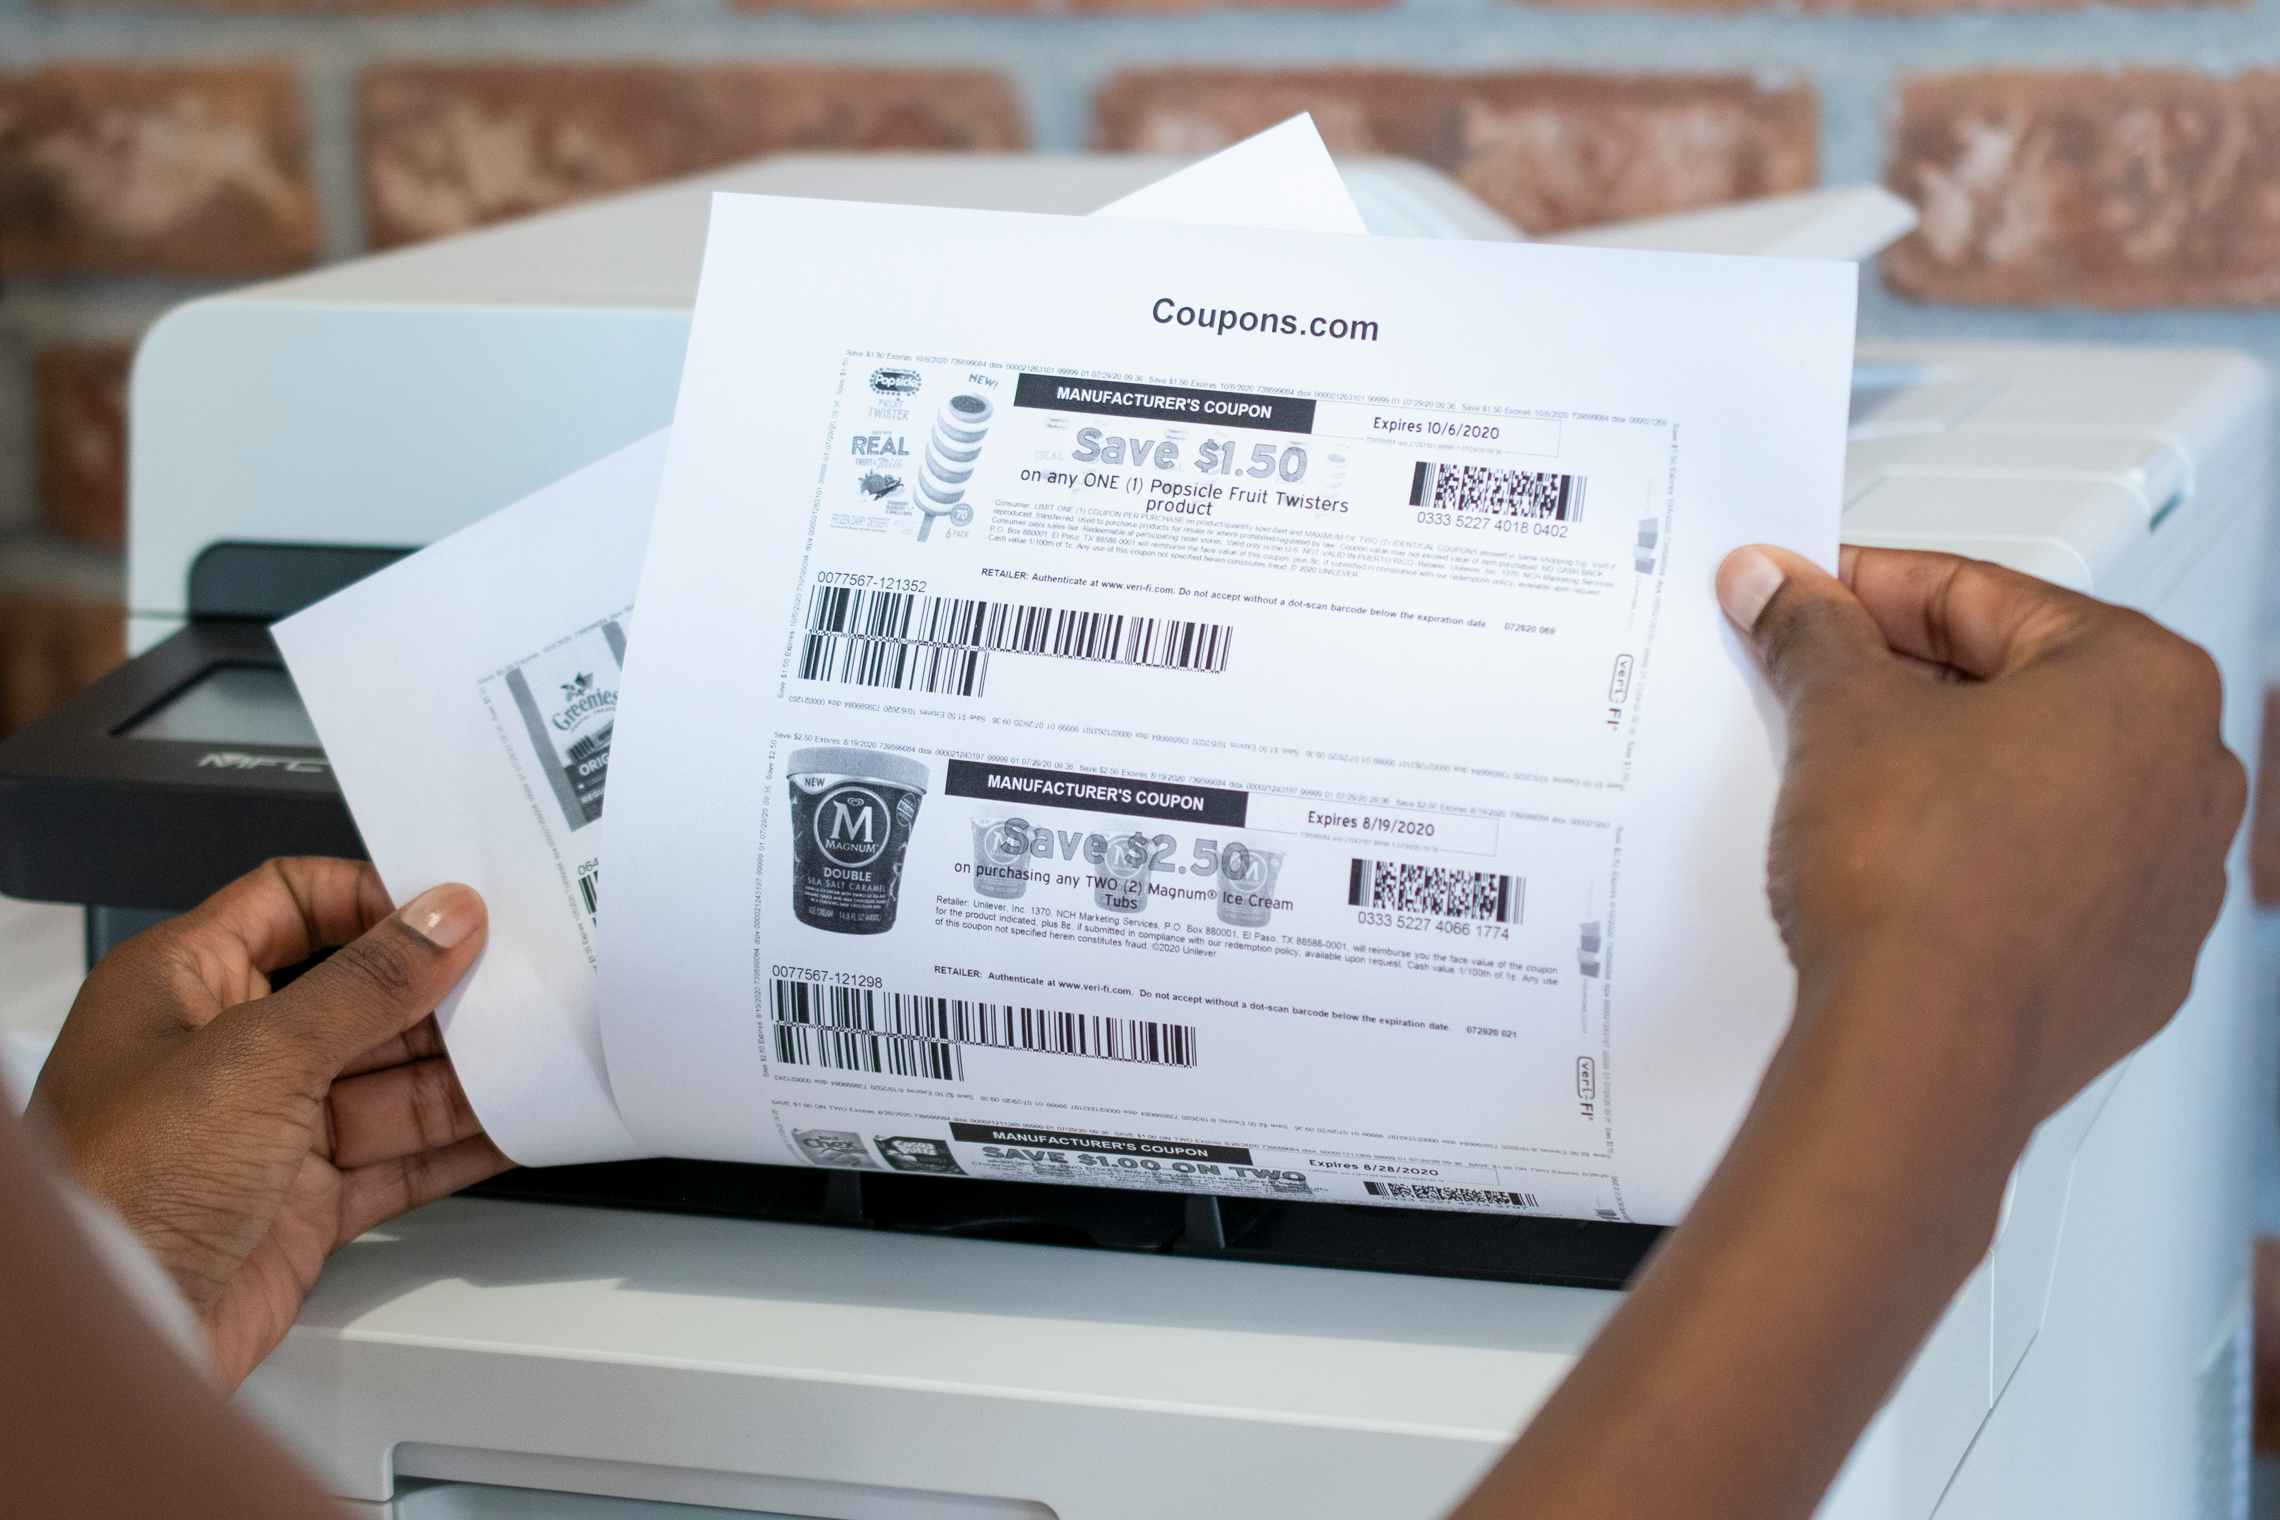 A person pulling coupons out of a printer.